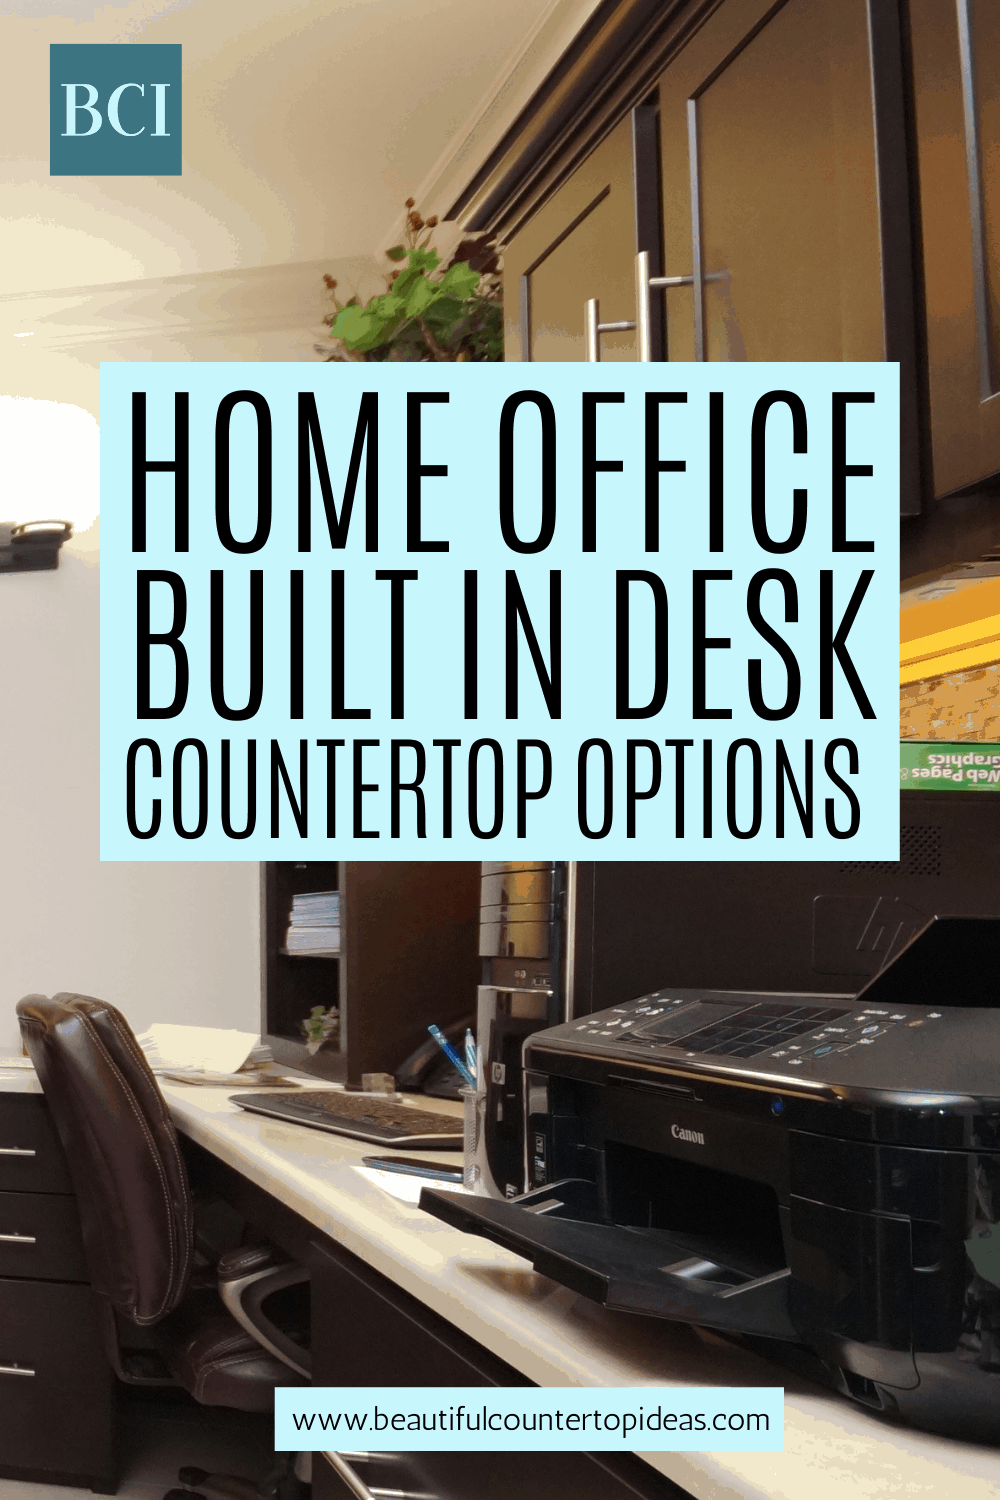 With everyone doing WFH and remote learning, a home office built in desk might be a good idea. Get advice on the countertop options out there.